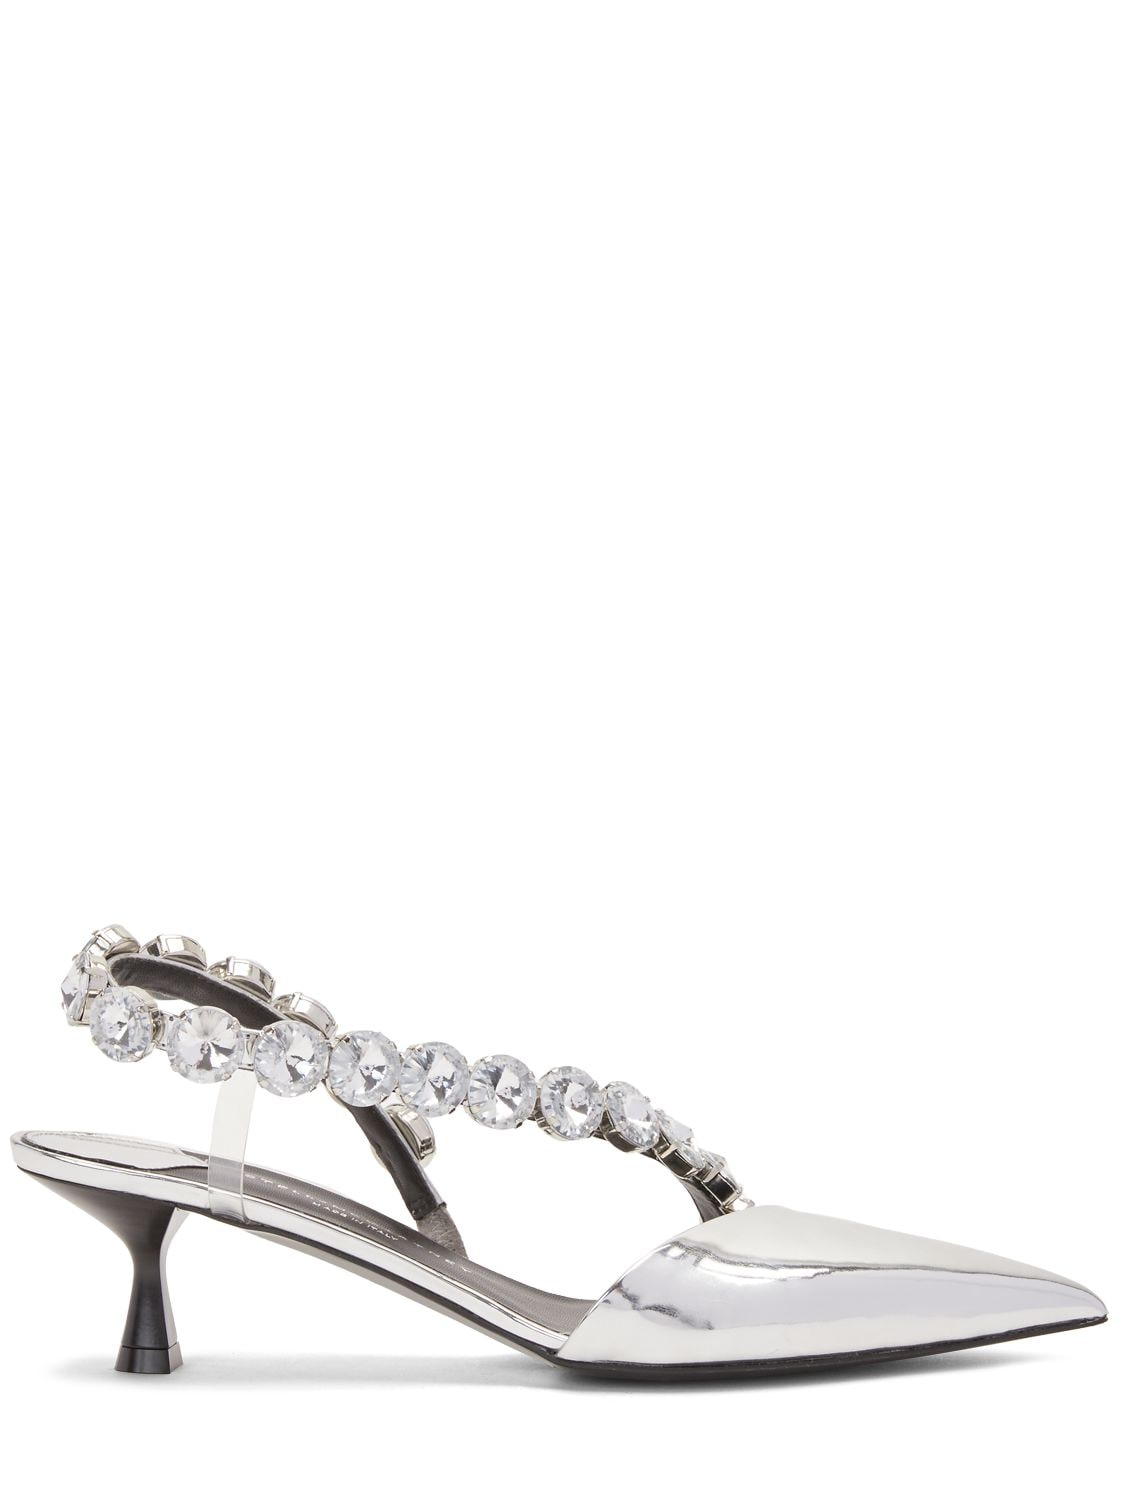 Stella Mccartney 50mm Stella Iconic Faux Leather Pumps In Silver